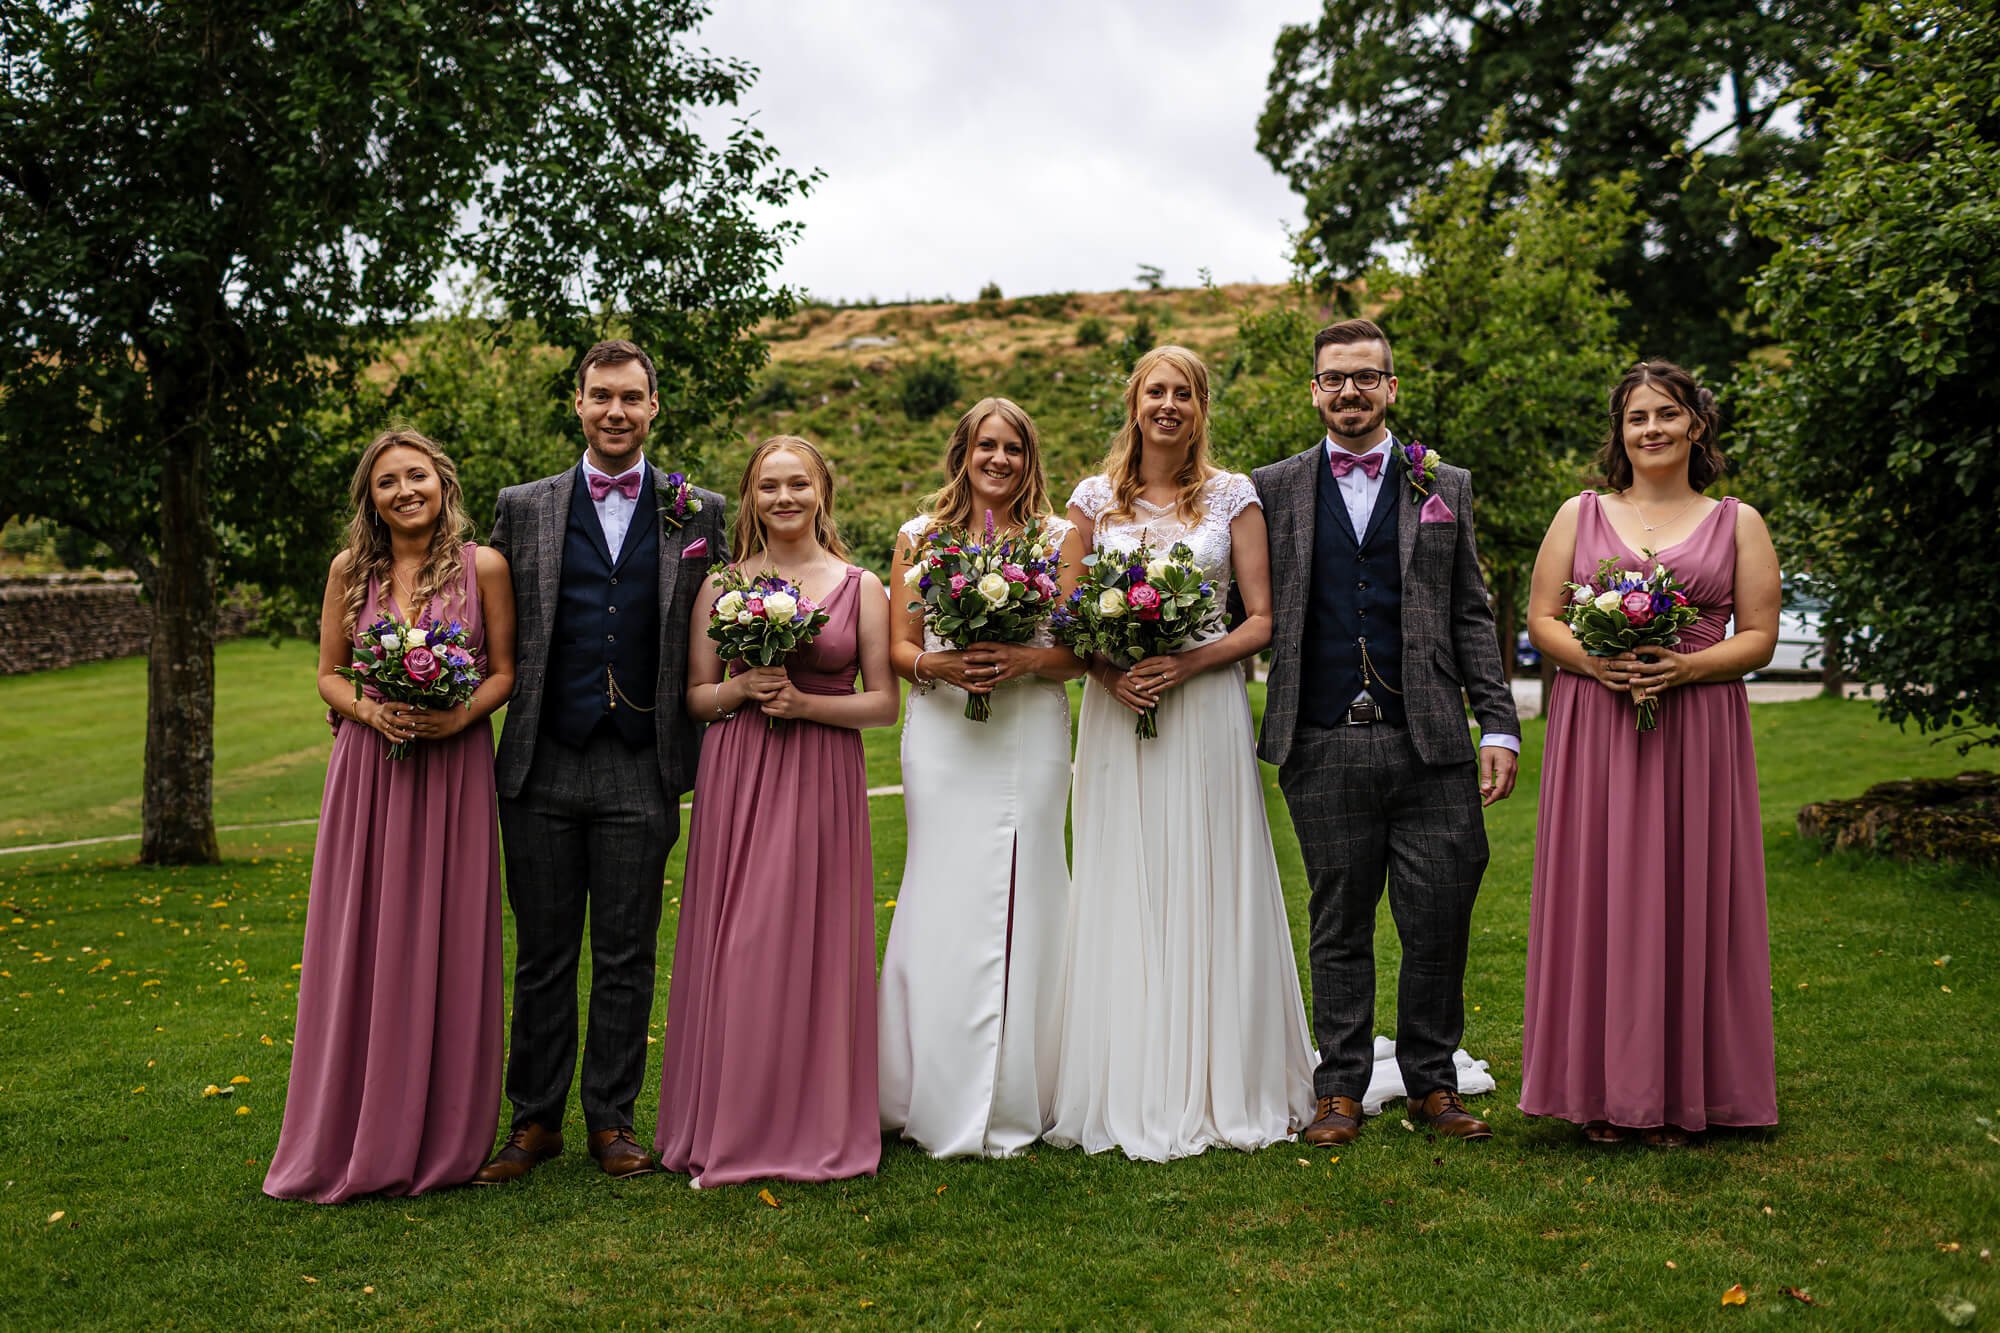 The wedding party in Yorkshire